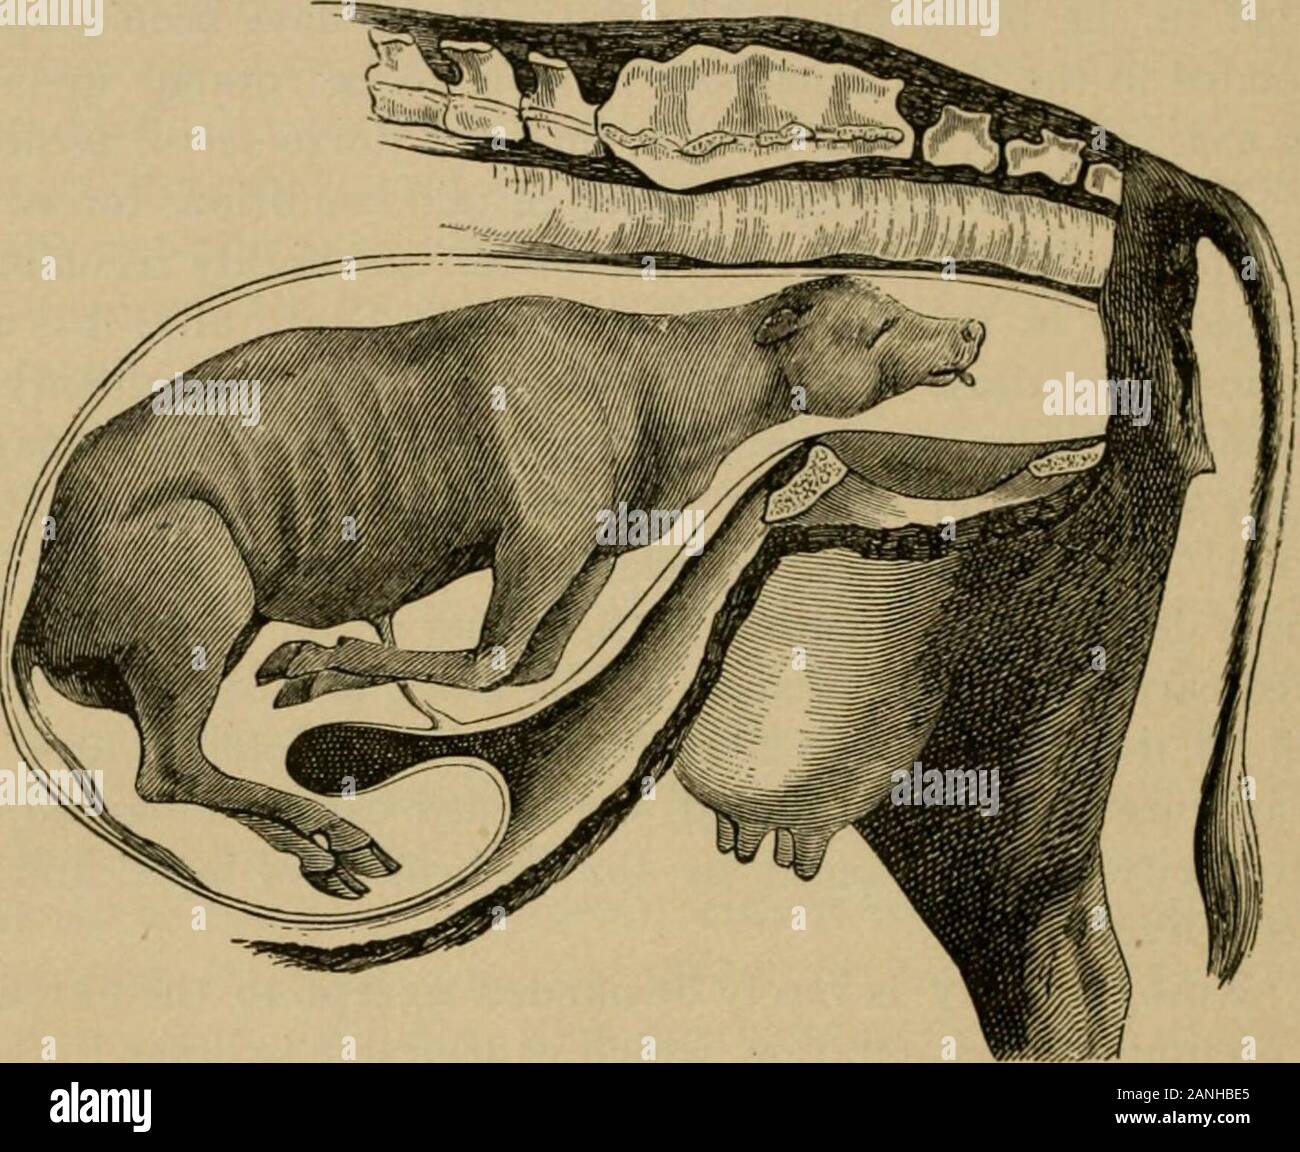 Veterinary obstetrics, including the diseases of breeding animals and of the new-born . anteriorlimbs are completely retained, and assume the position shown inFig. 132. Under these conditions one or both carpal articula-tions project down deeply into the uterine cavity in front of thepubis of the mother, with the radius fully extended upon thehumerus, so that those two bones constitute one elongated, rigidcolumn. In this position of the fetus there can be no yieldingin a posterior direction from the scalpulo-humeral articulation tothe carpus. As a consequence of this deviation, the shoulders o Stock Photo